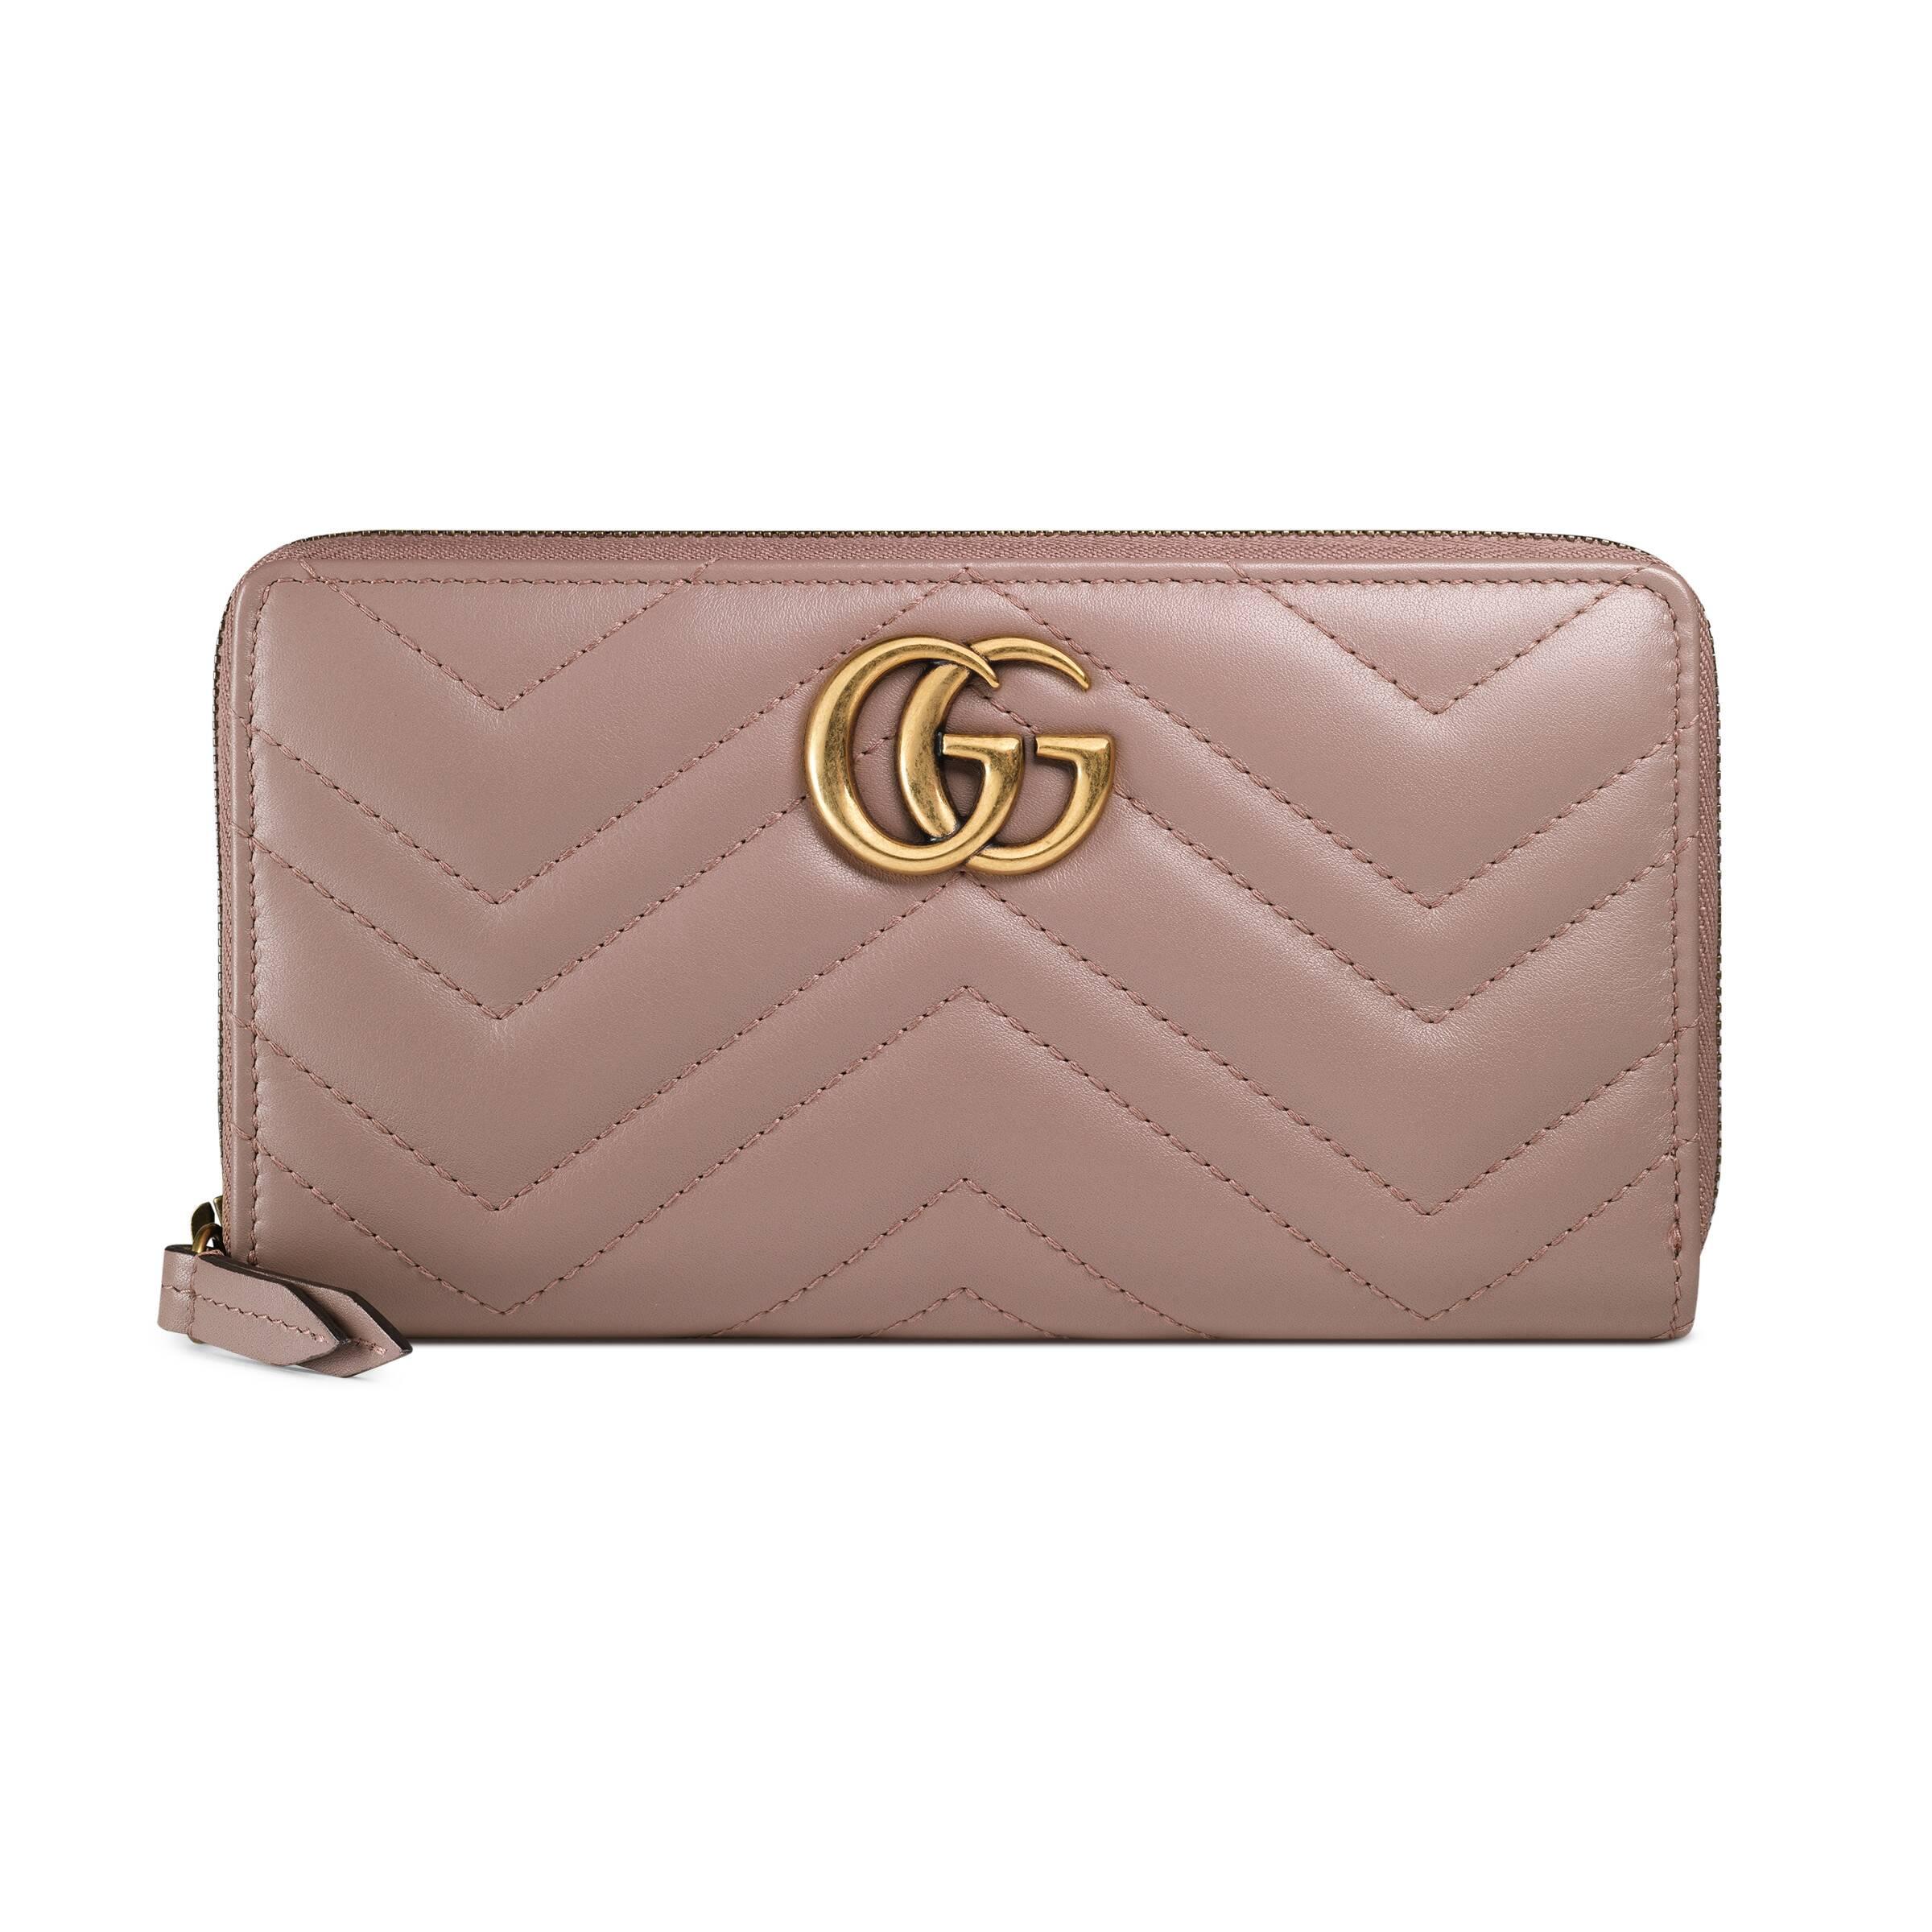 Gucci Leather GG Marmont Zip Around Wallet in Pink - Lyst